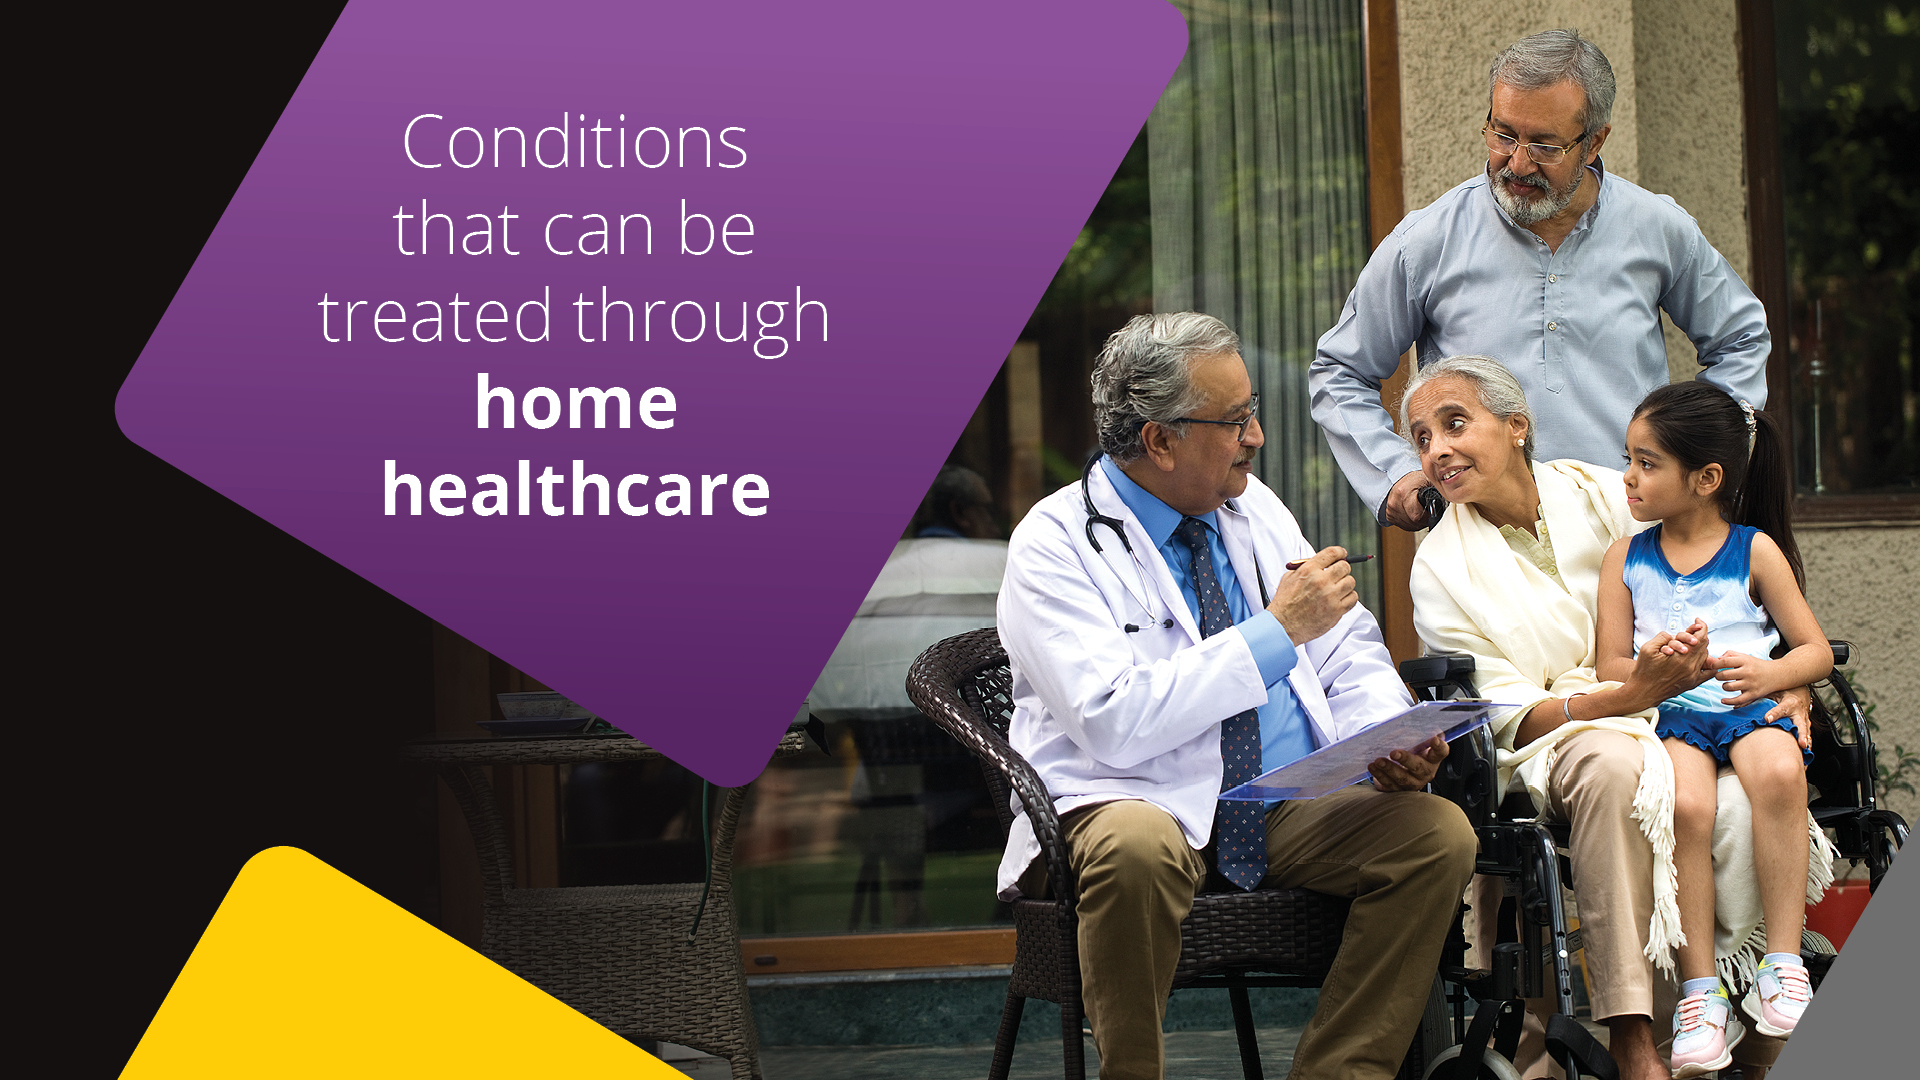 Conditions that can be treated through home healthcare